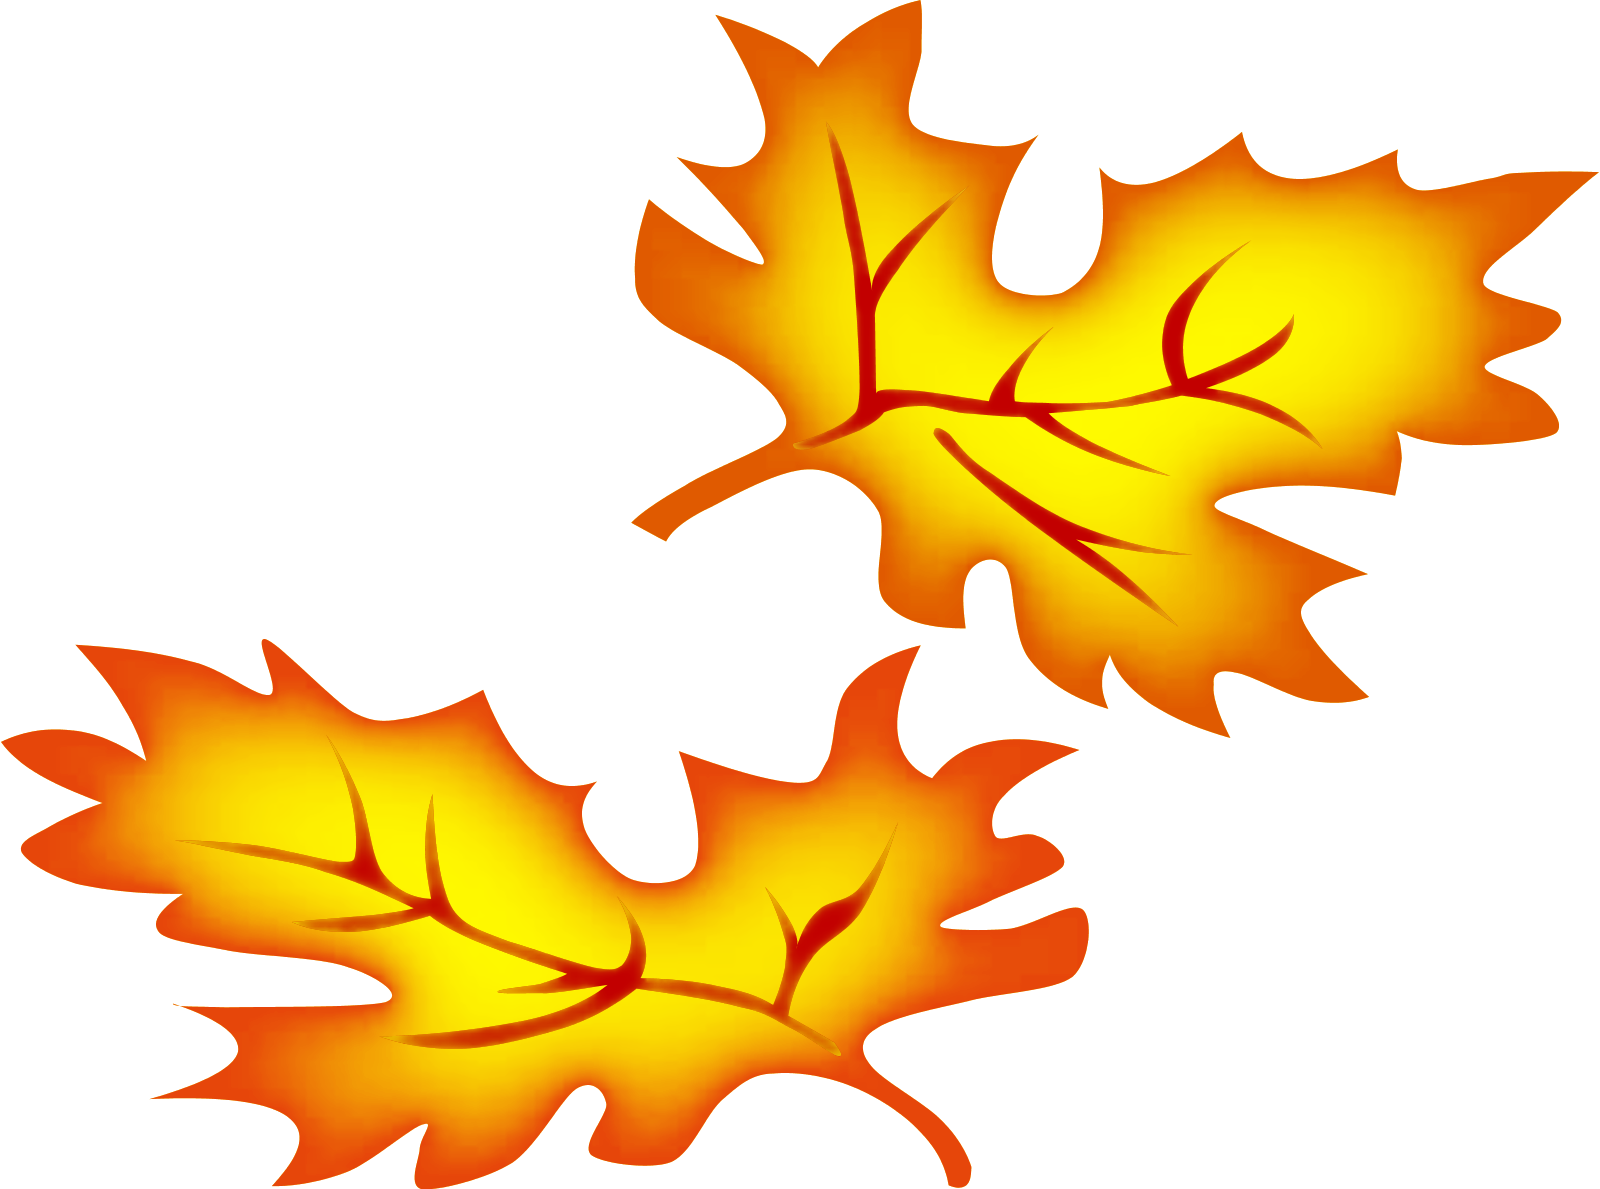 Fall Leaf Clipart Border | Clipart library - Free Clipart Images